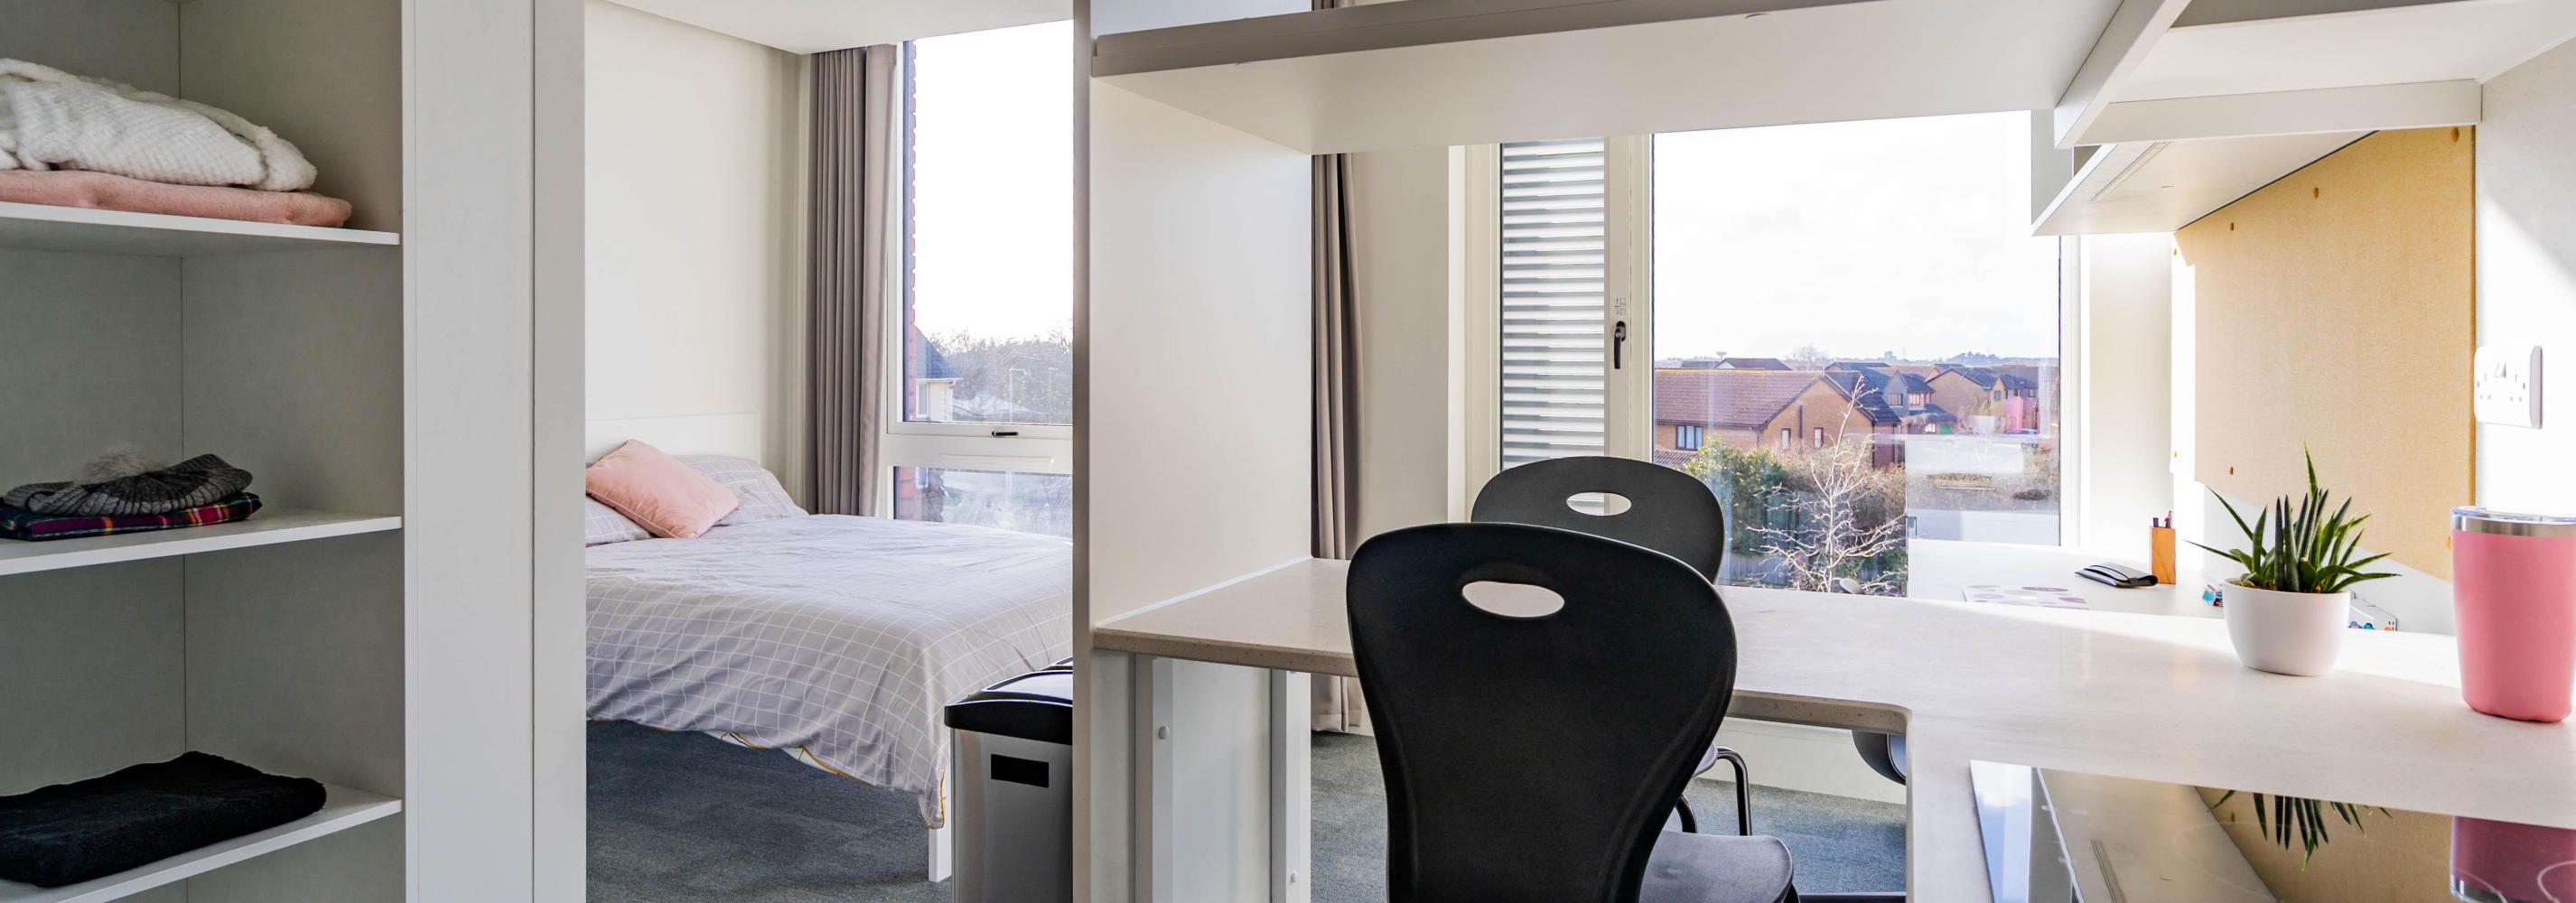 A self contained studio showing a double bed and study area next to floor to ceiling windows. A large set of storage shelves and a breakfast bar seating area with 2 seats is between the camera and the bed.